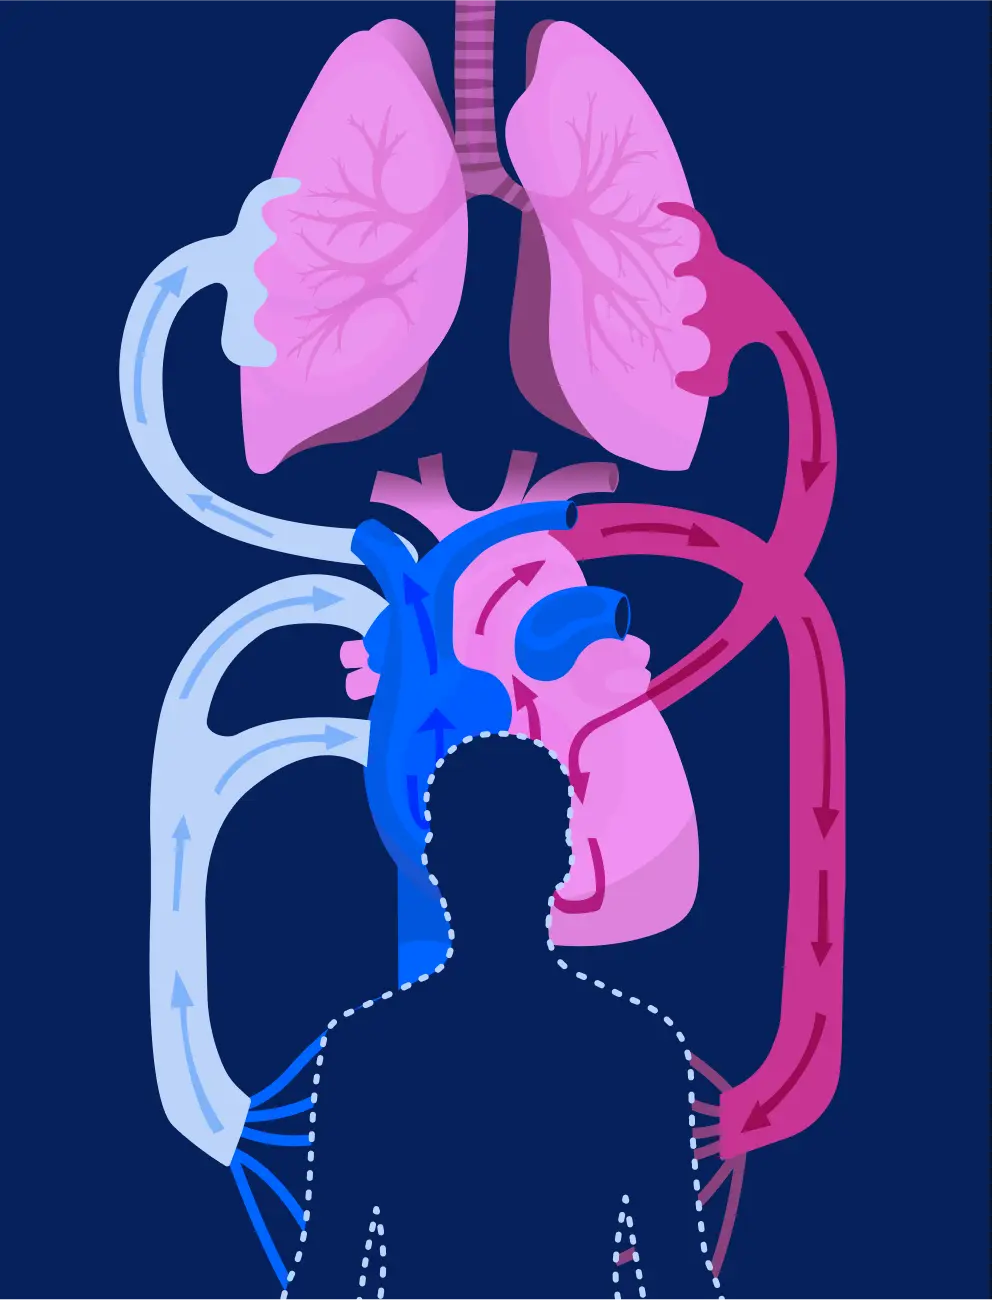 Your Heart and Lungs: The Ultimate Relationship